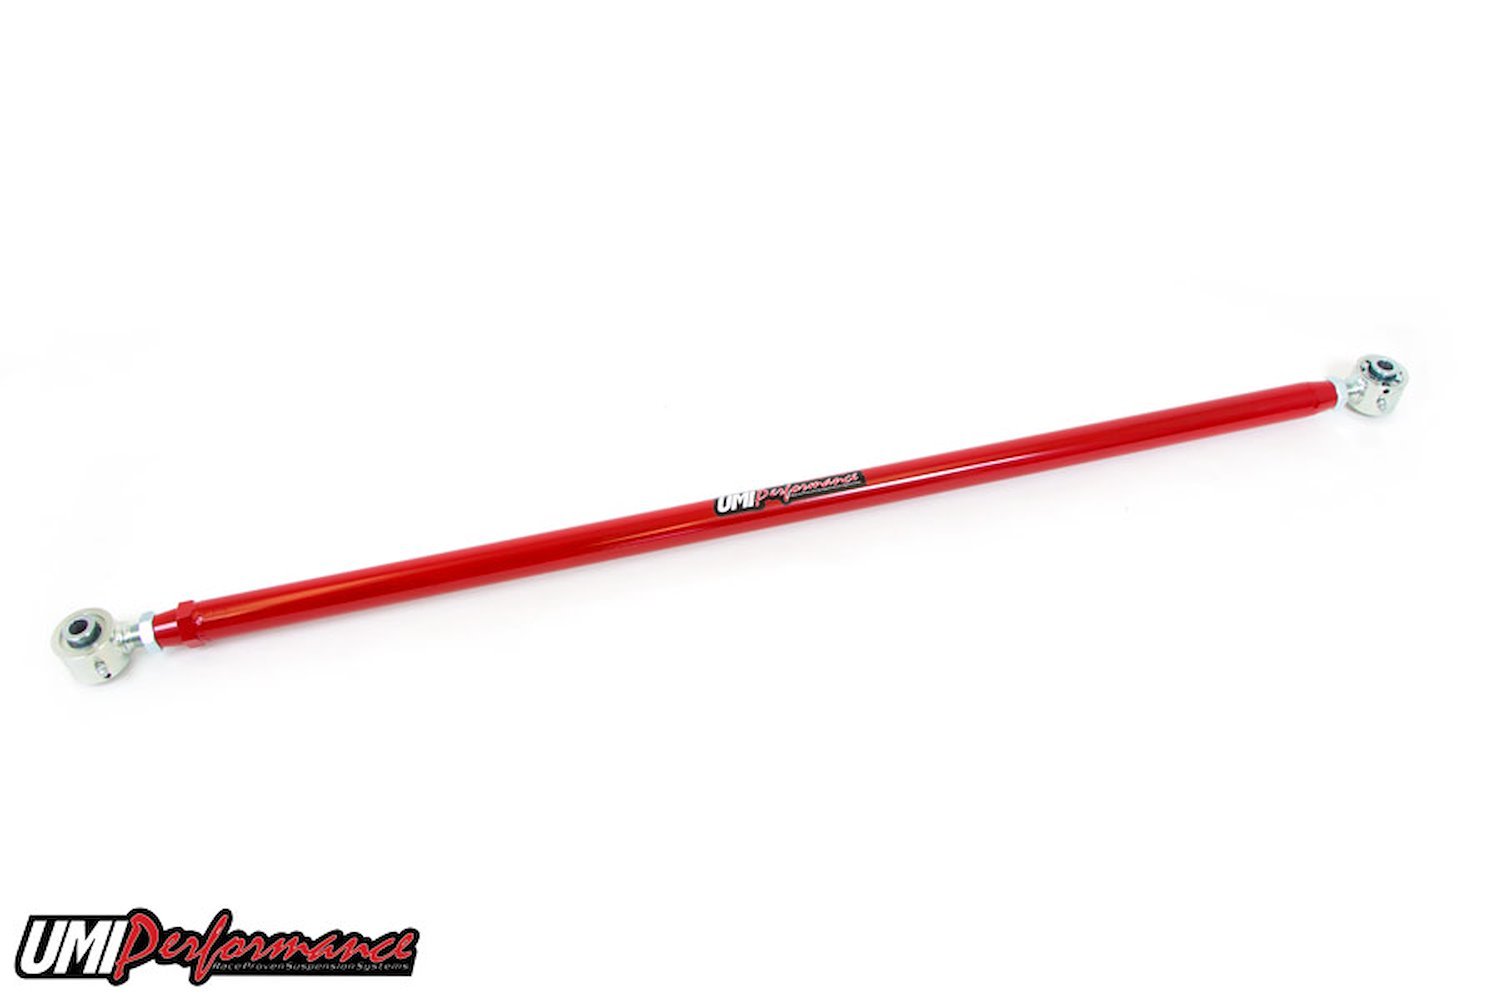 UMI?s double adjustable panhard bar is a must for rear end centering after vehicle lowering as well